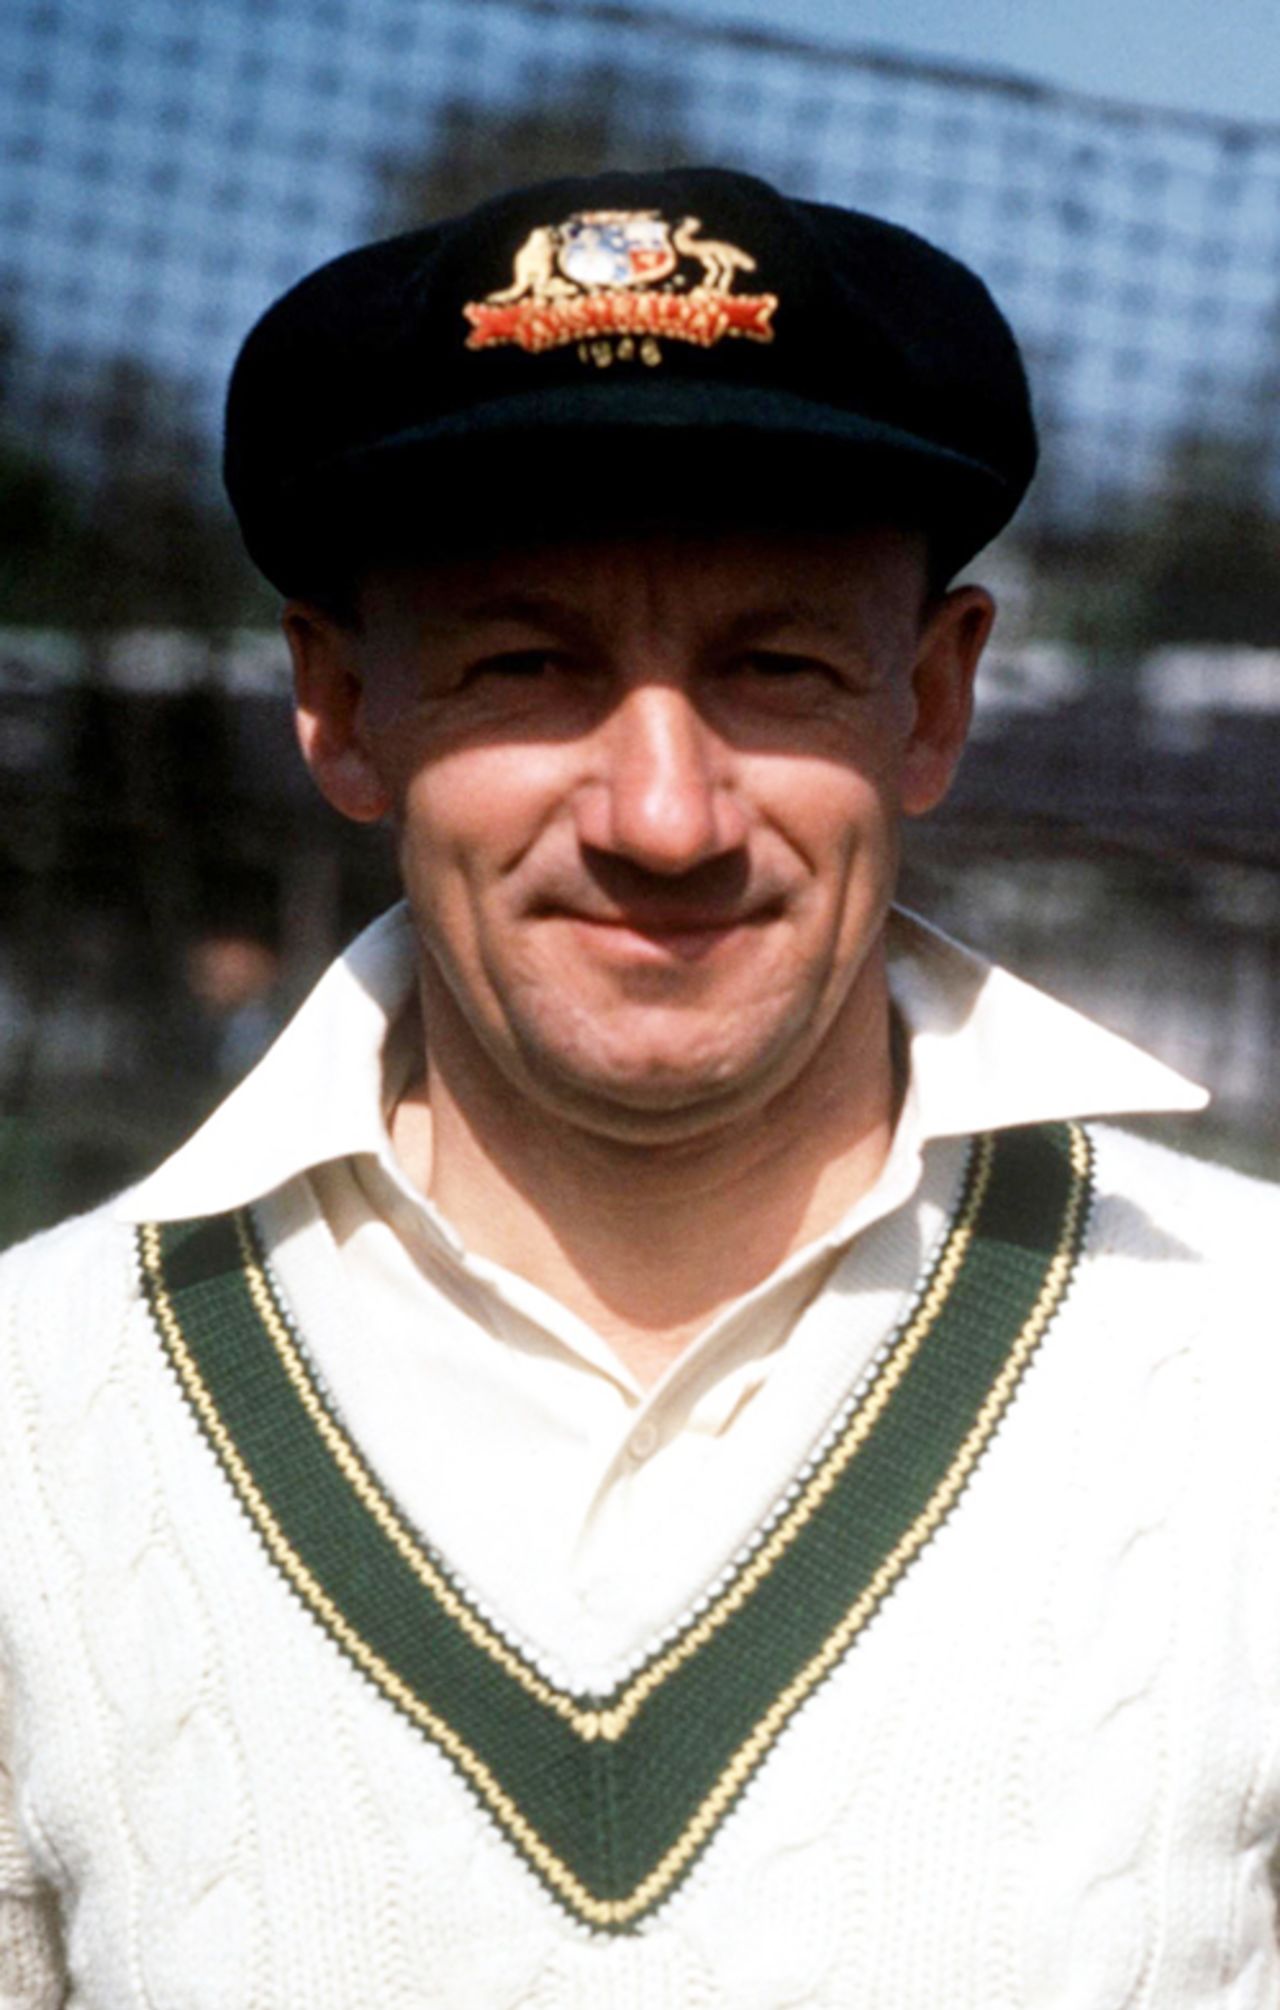 Don Bradman pictured on the 1948 Ashes tour